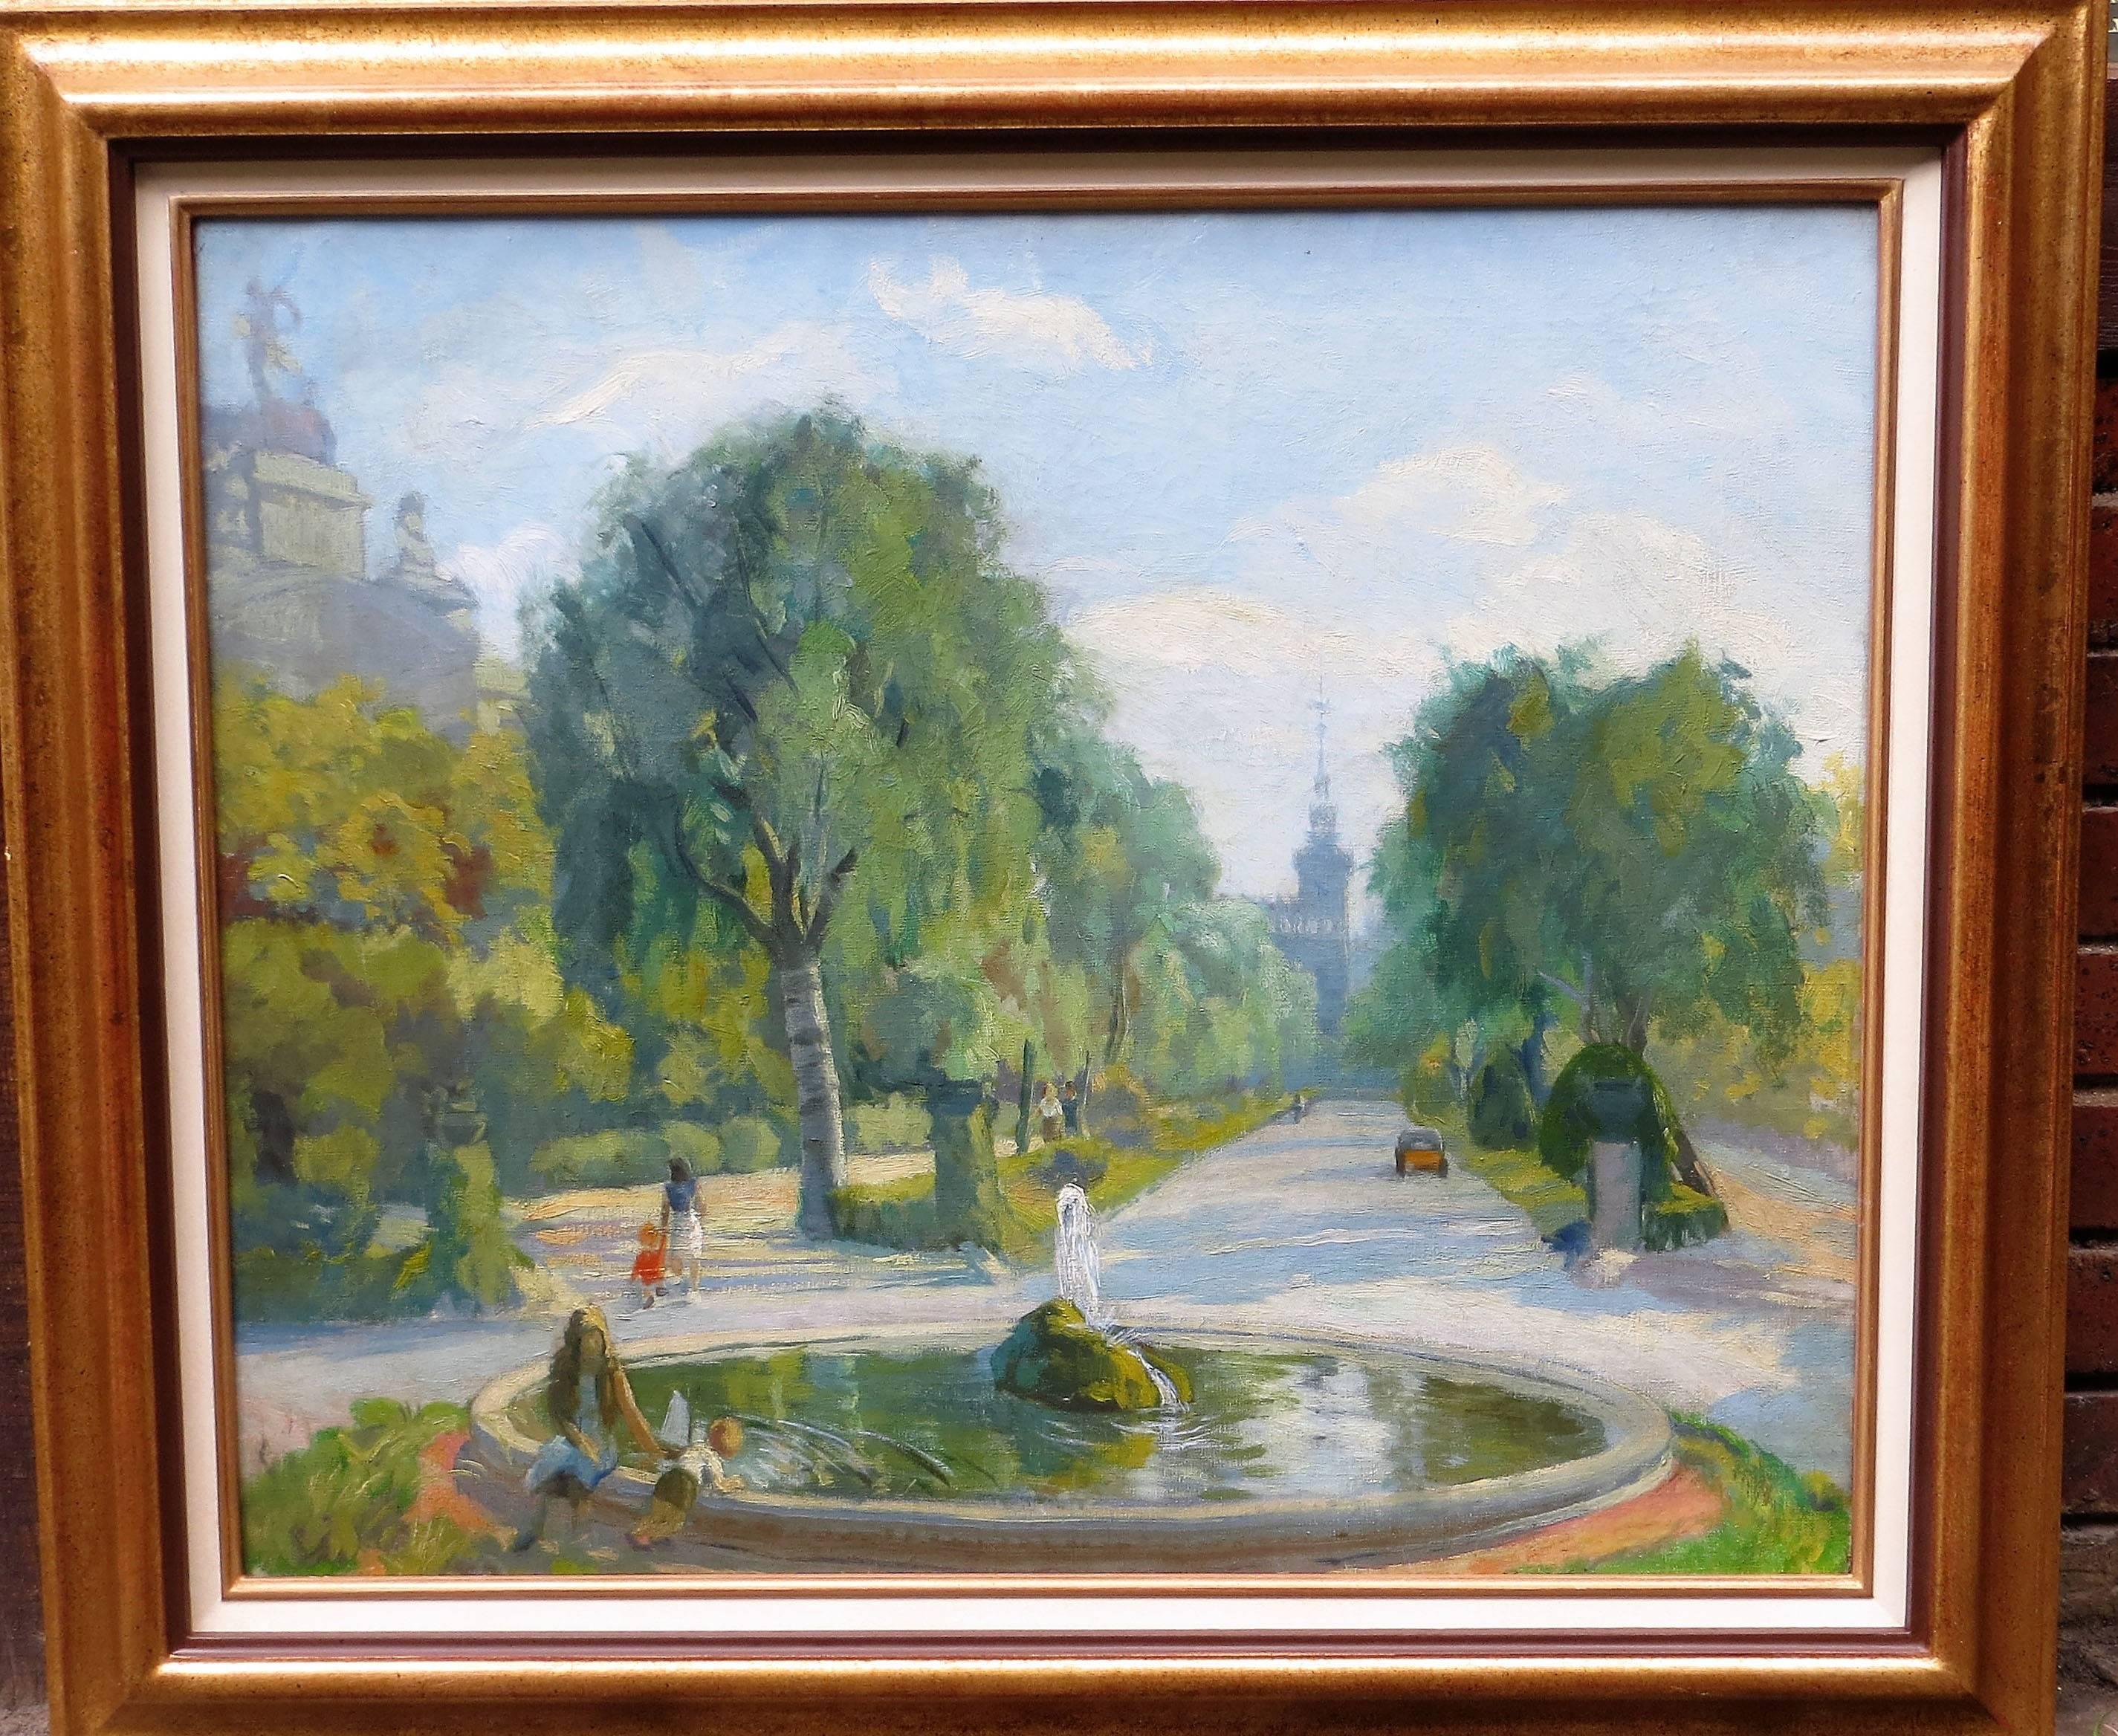 Park in PARIS - Painting by Unknown